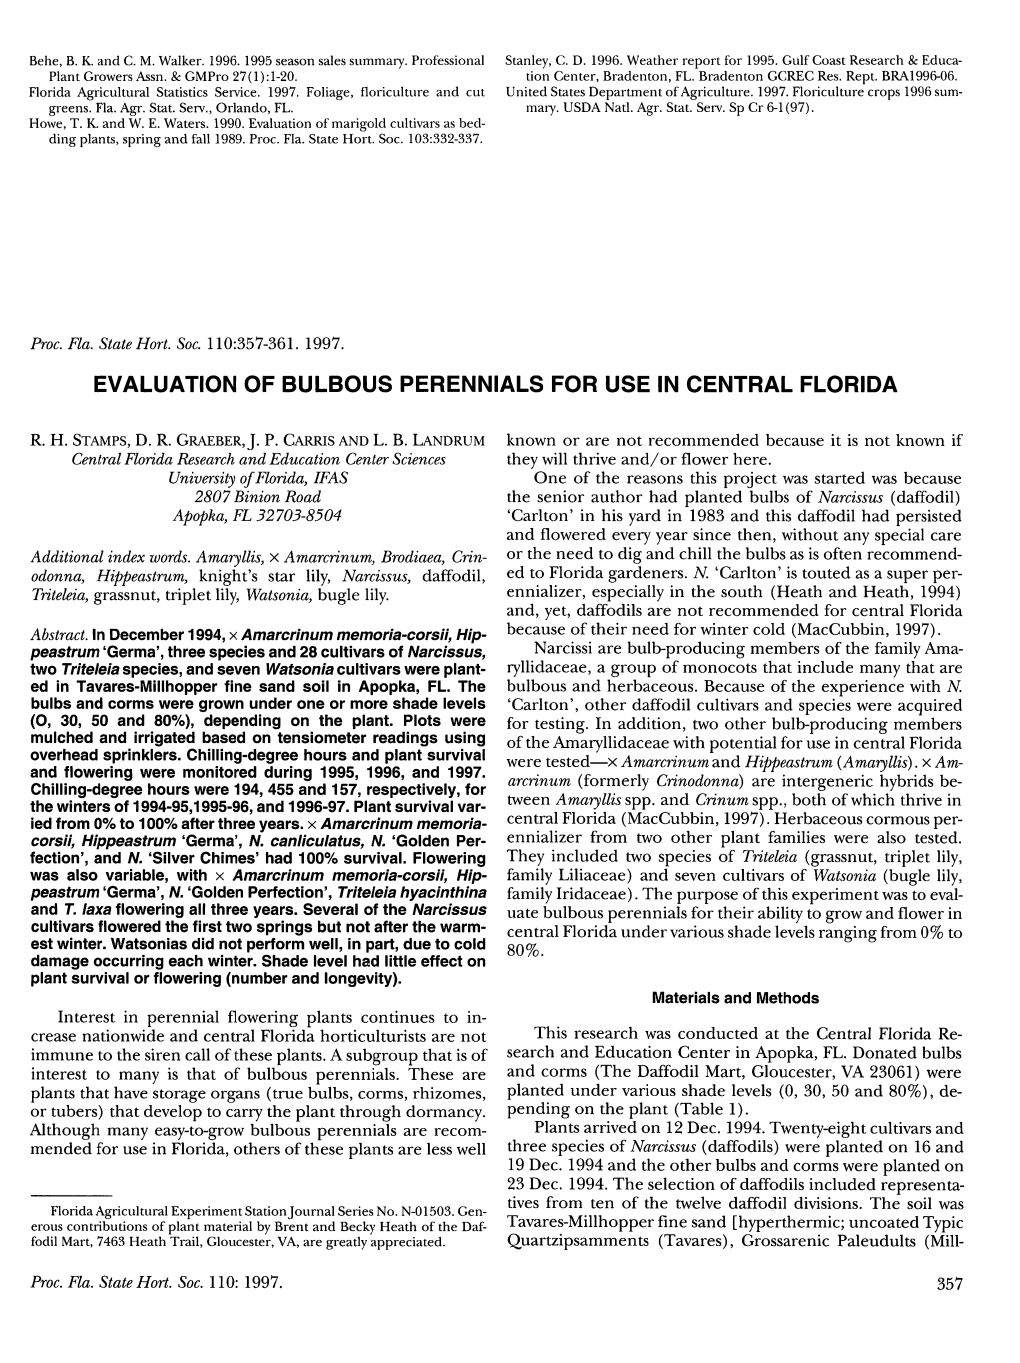 Evaluation of Bulbous Perennials for Use in Central Florida